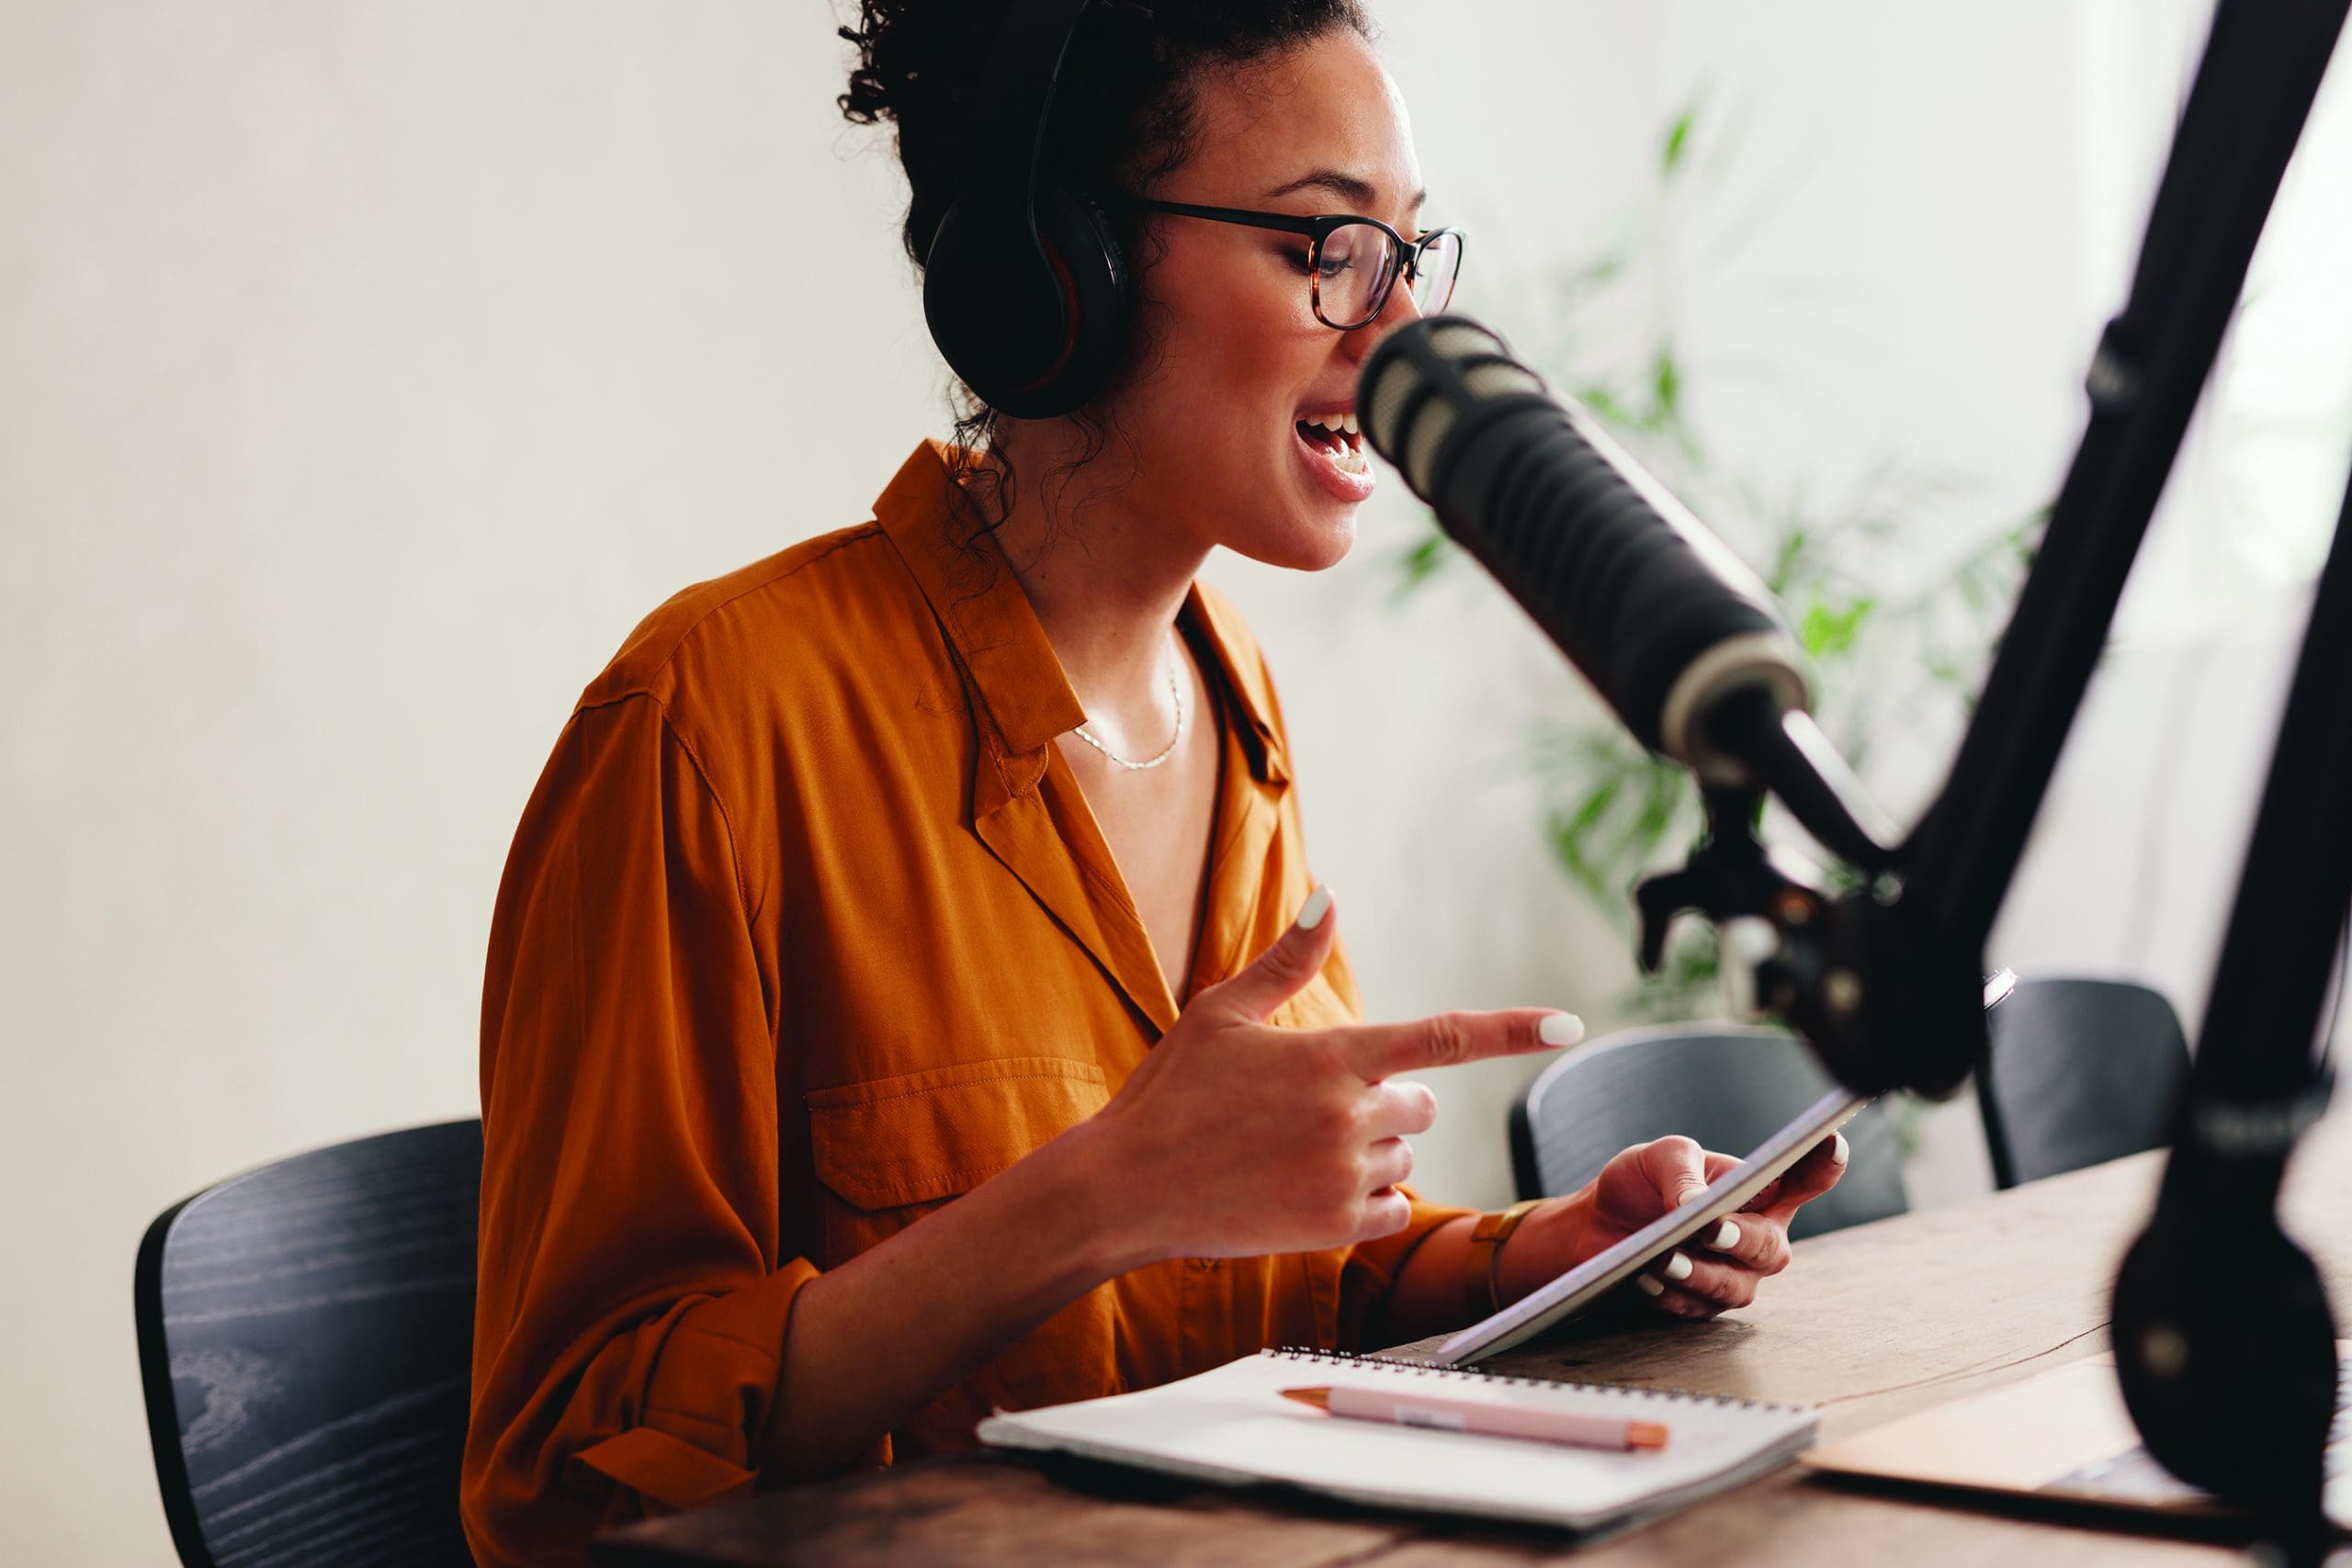 Improve Listener Retention with Podcast Chapters